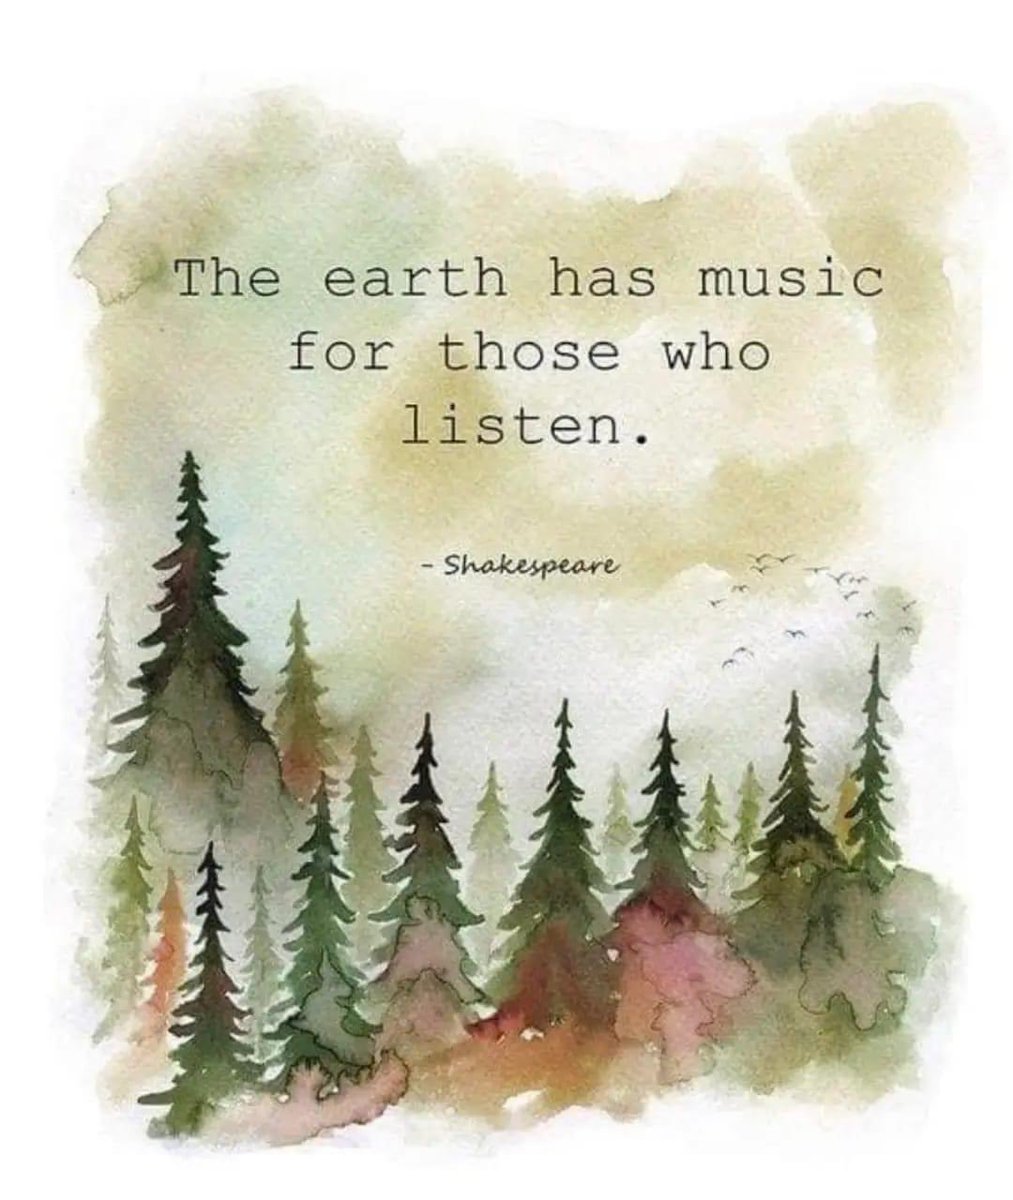 “The earth has music for those who listen”

William Shakespeare 

#musicsensations #dj_adam_i_ #musiceverywhere #musicislife #musicishappiness #musiclovers #musicforyoursoul #neverstopplayingmusic #expressthroughmusic #musicunitespeople #fall2023 #musictherapy #djforlife